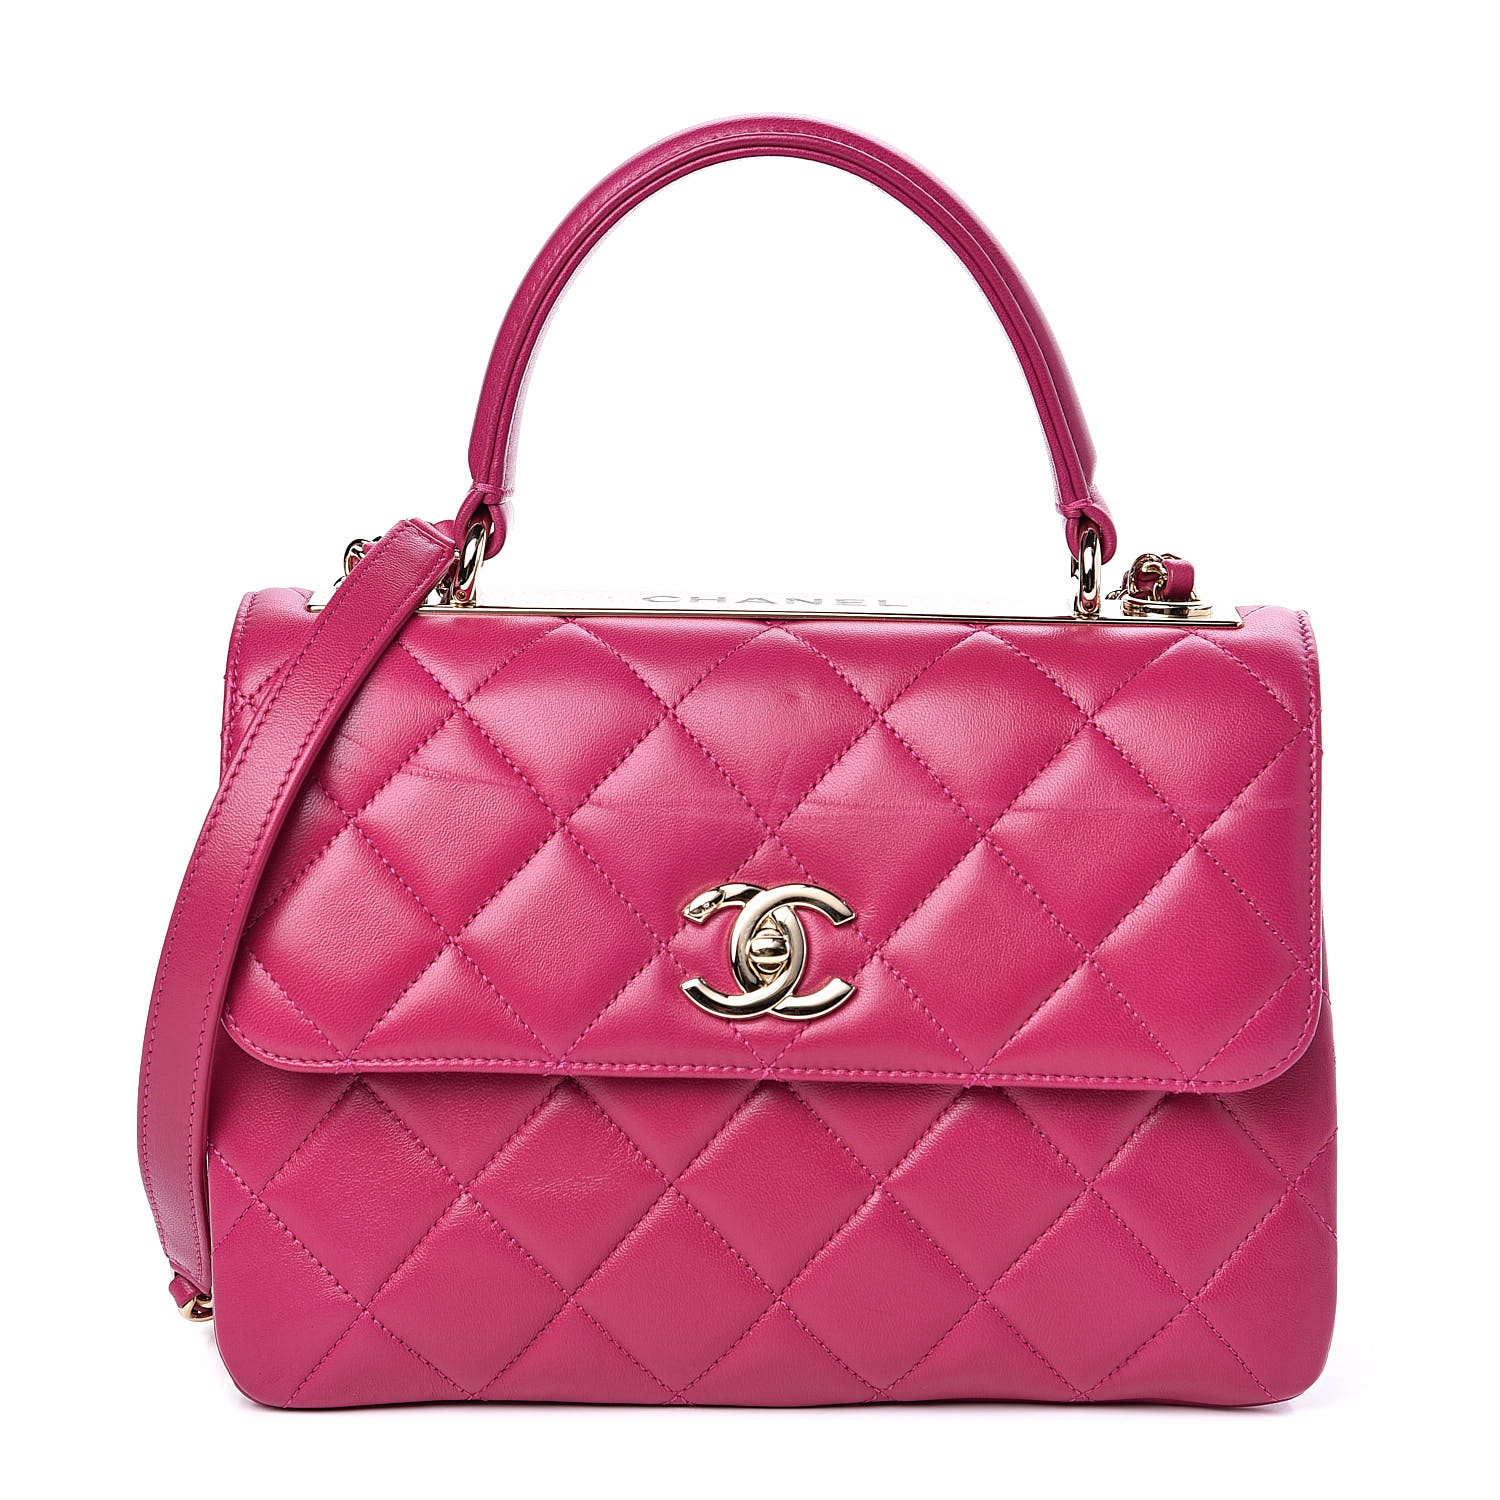 Chanel Small Purse Pinkfong | Paul Smith